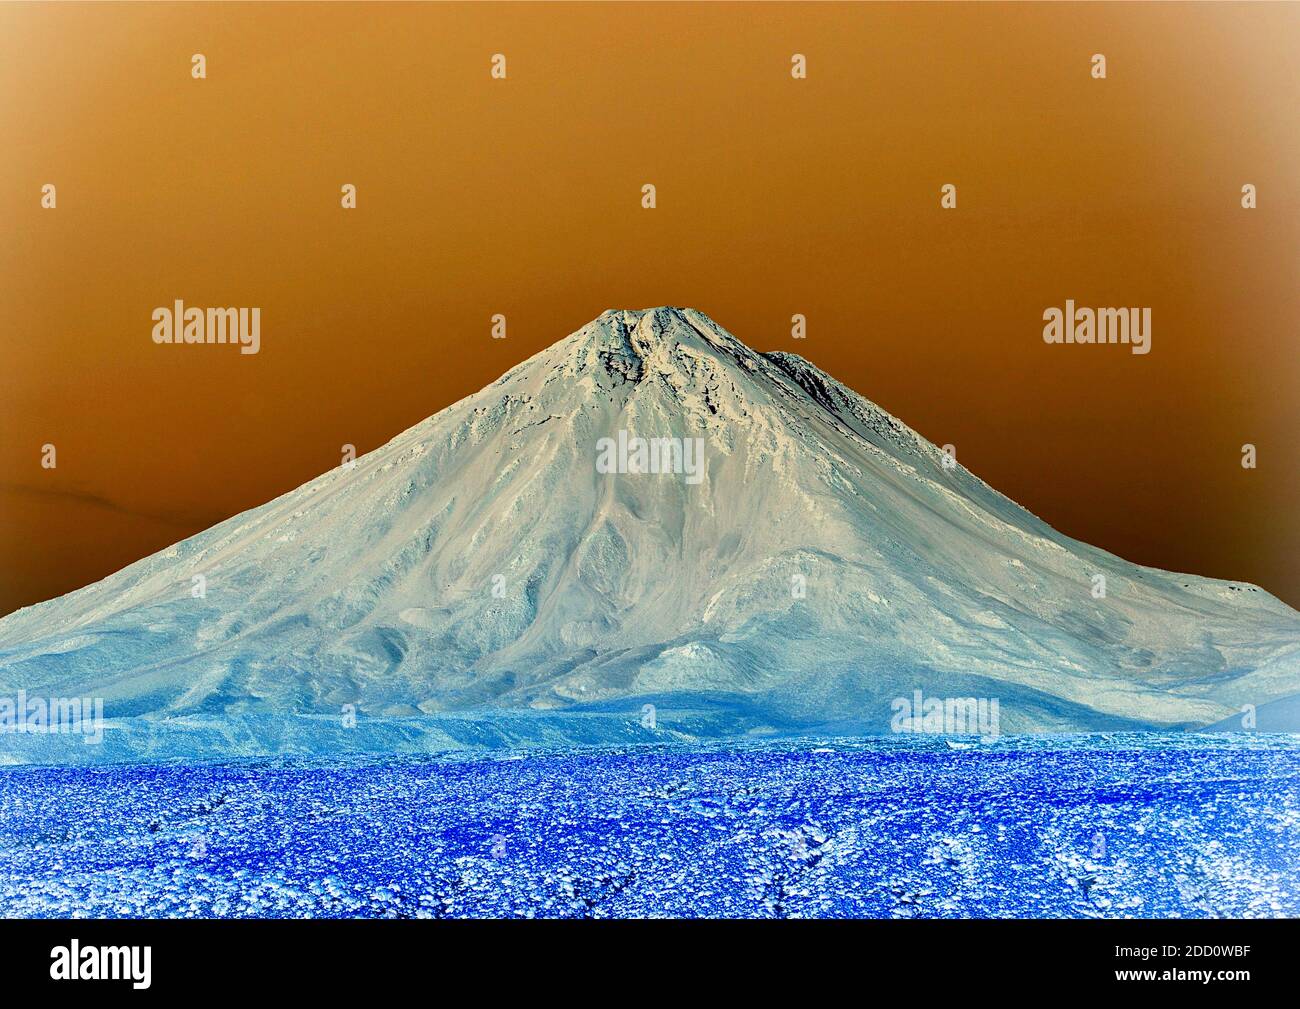 Atmospheric mountain landscape with copy space to add text. Stock Photo